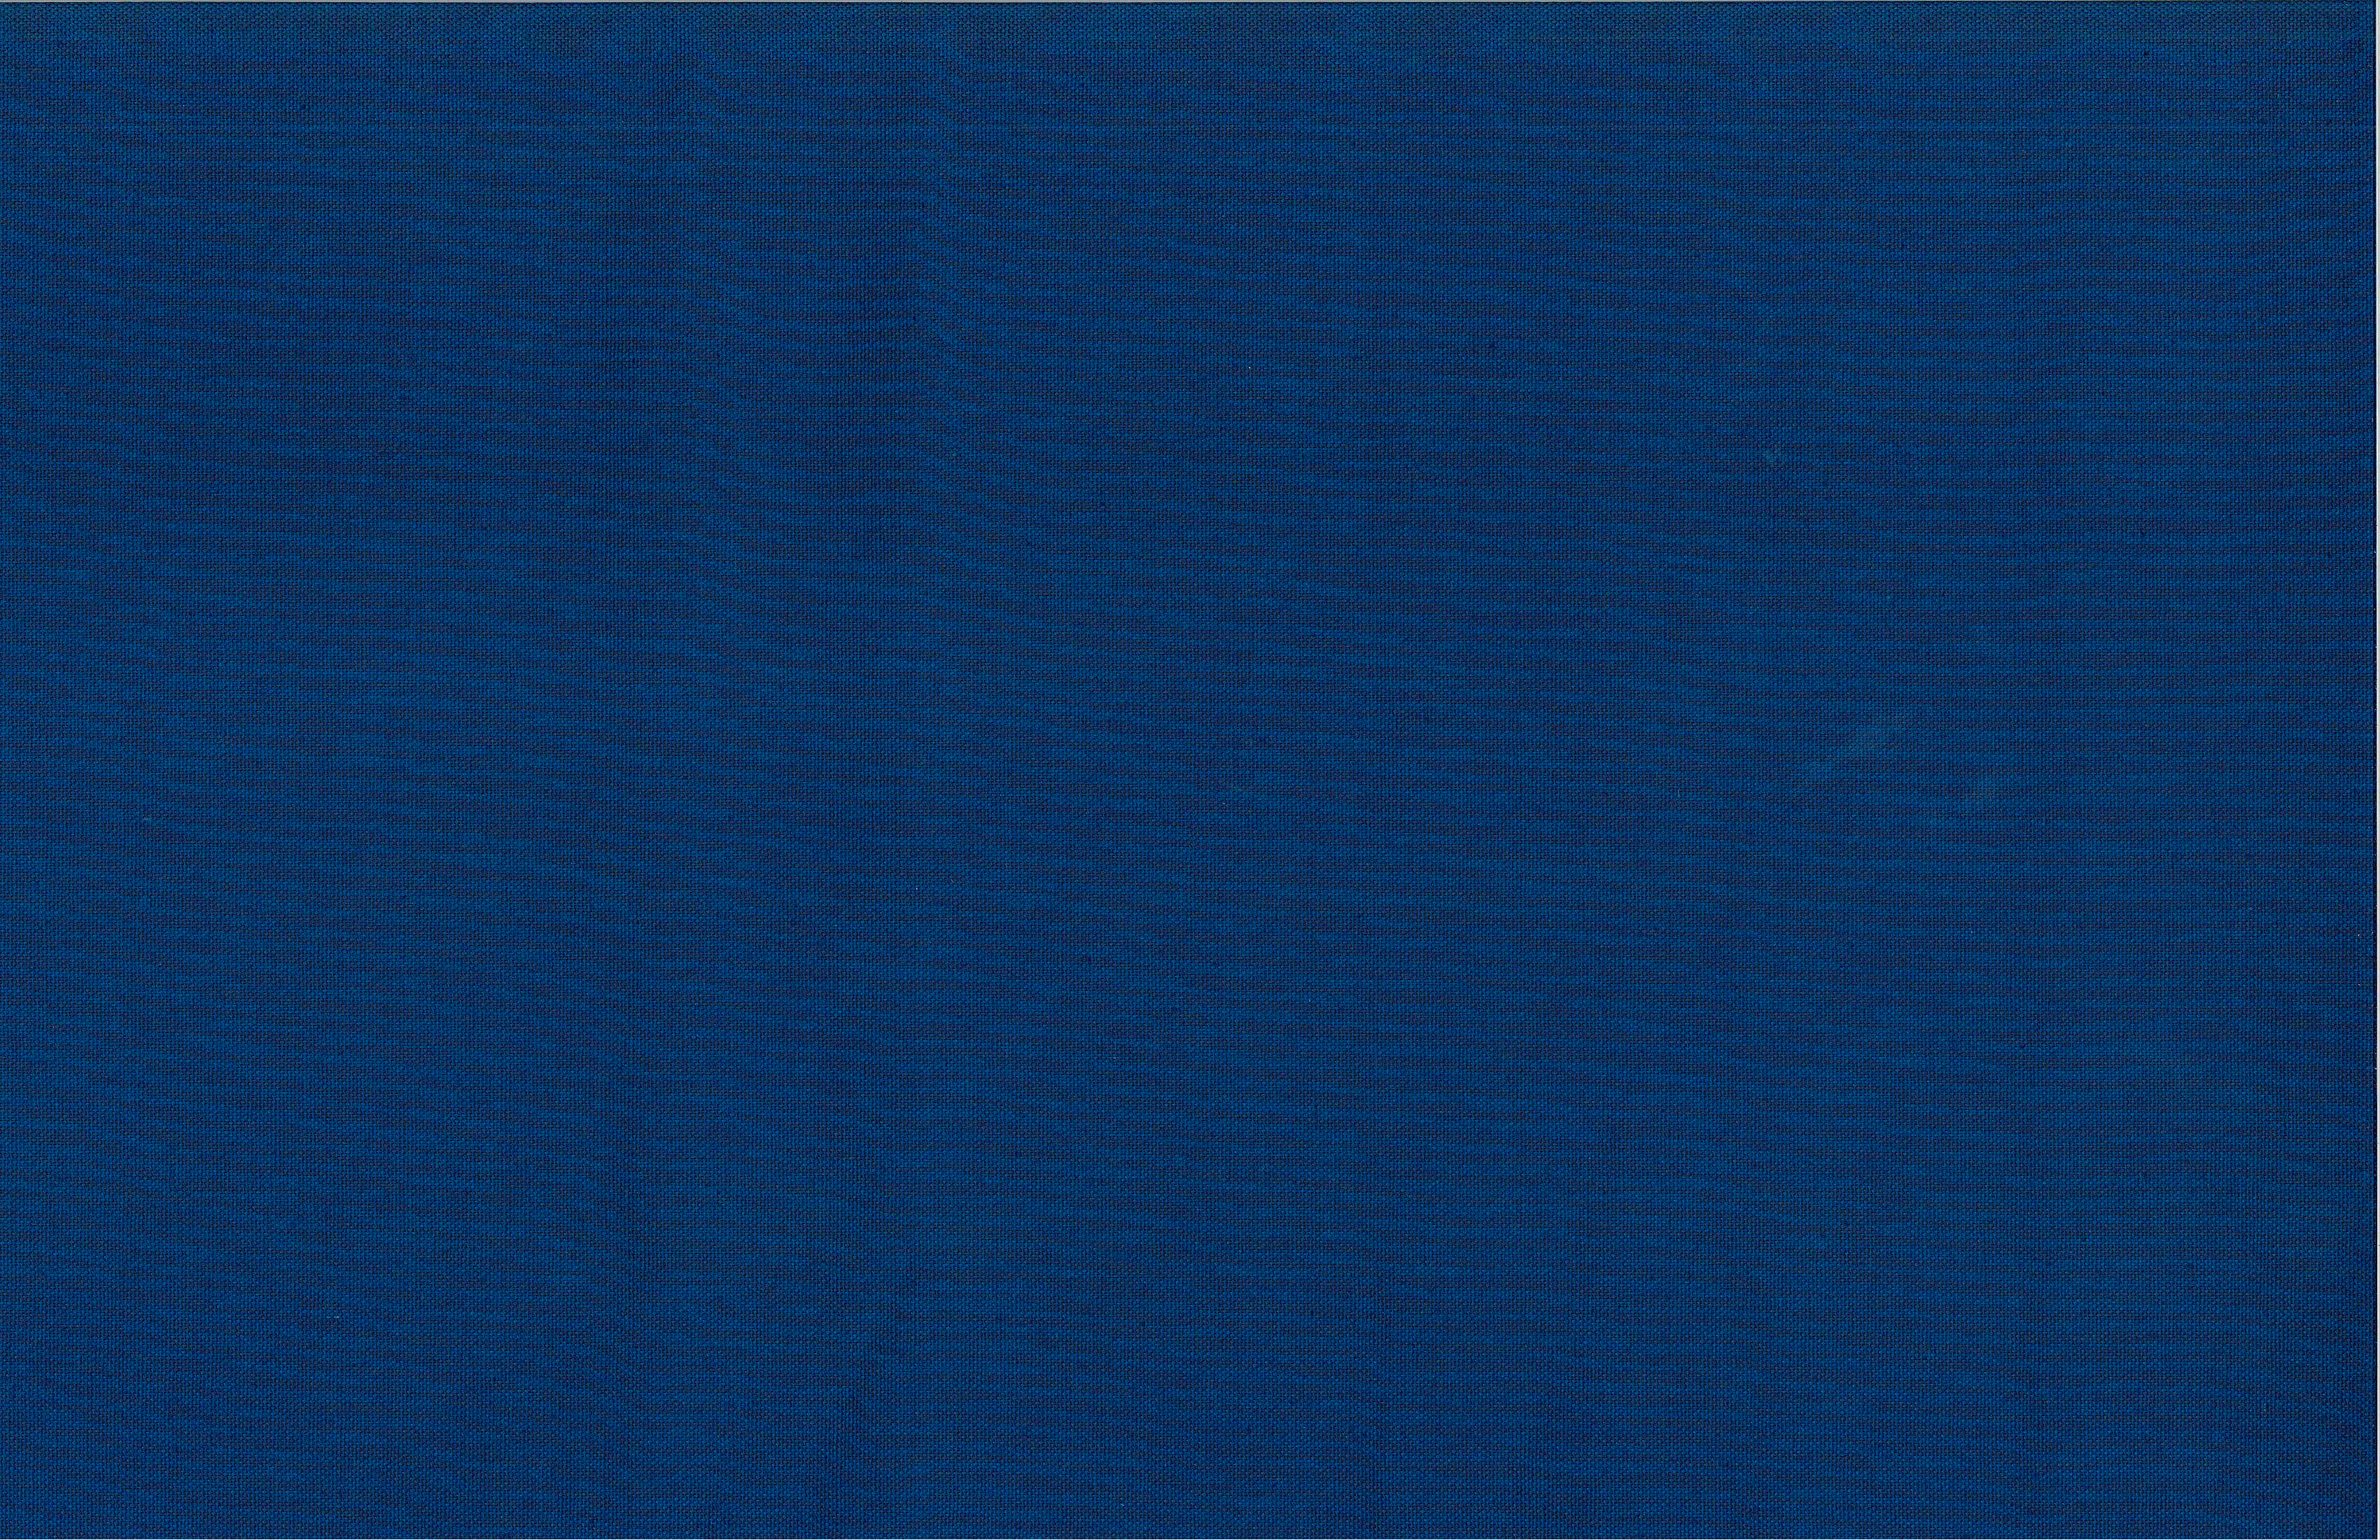 Waverly Inspirations 100% Cotton Duck 54" Solid Sapphire Blue Color Sewing Fabric by the Yard